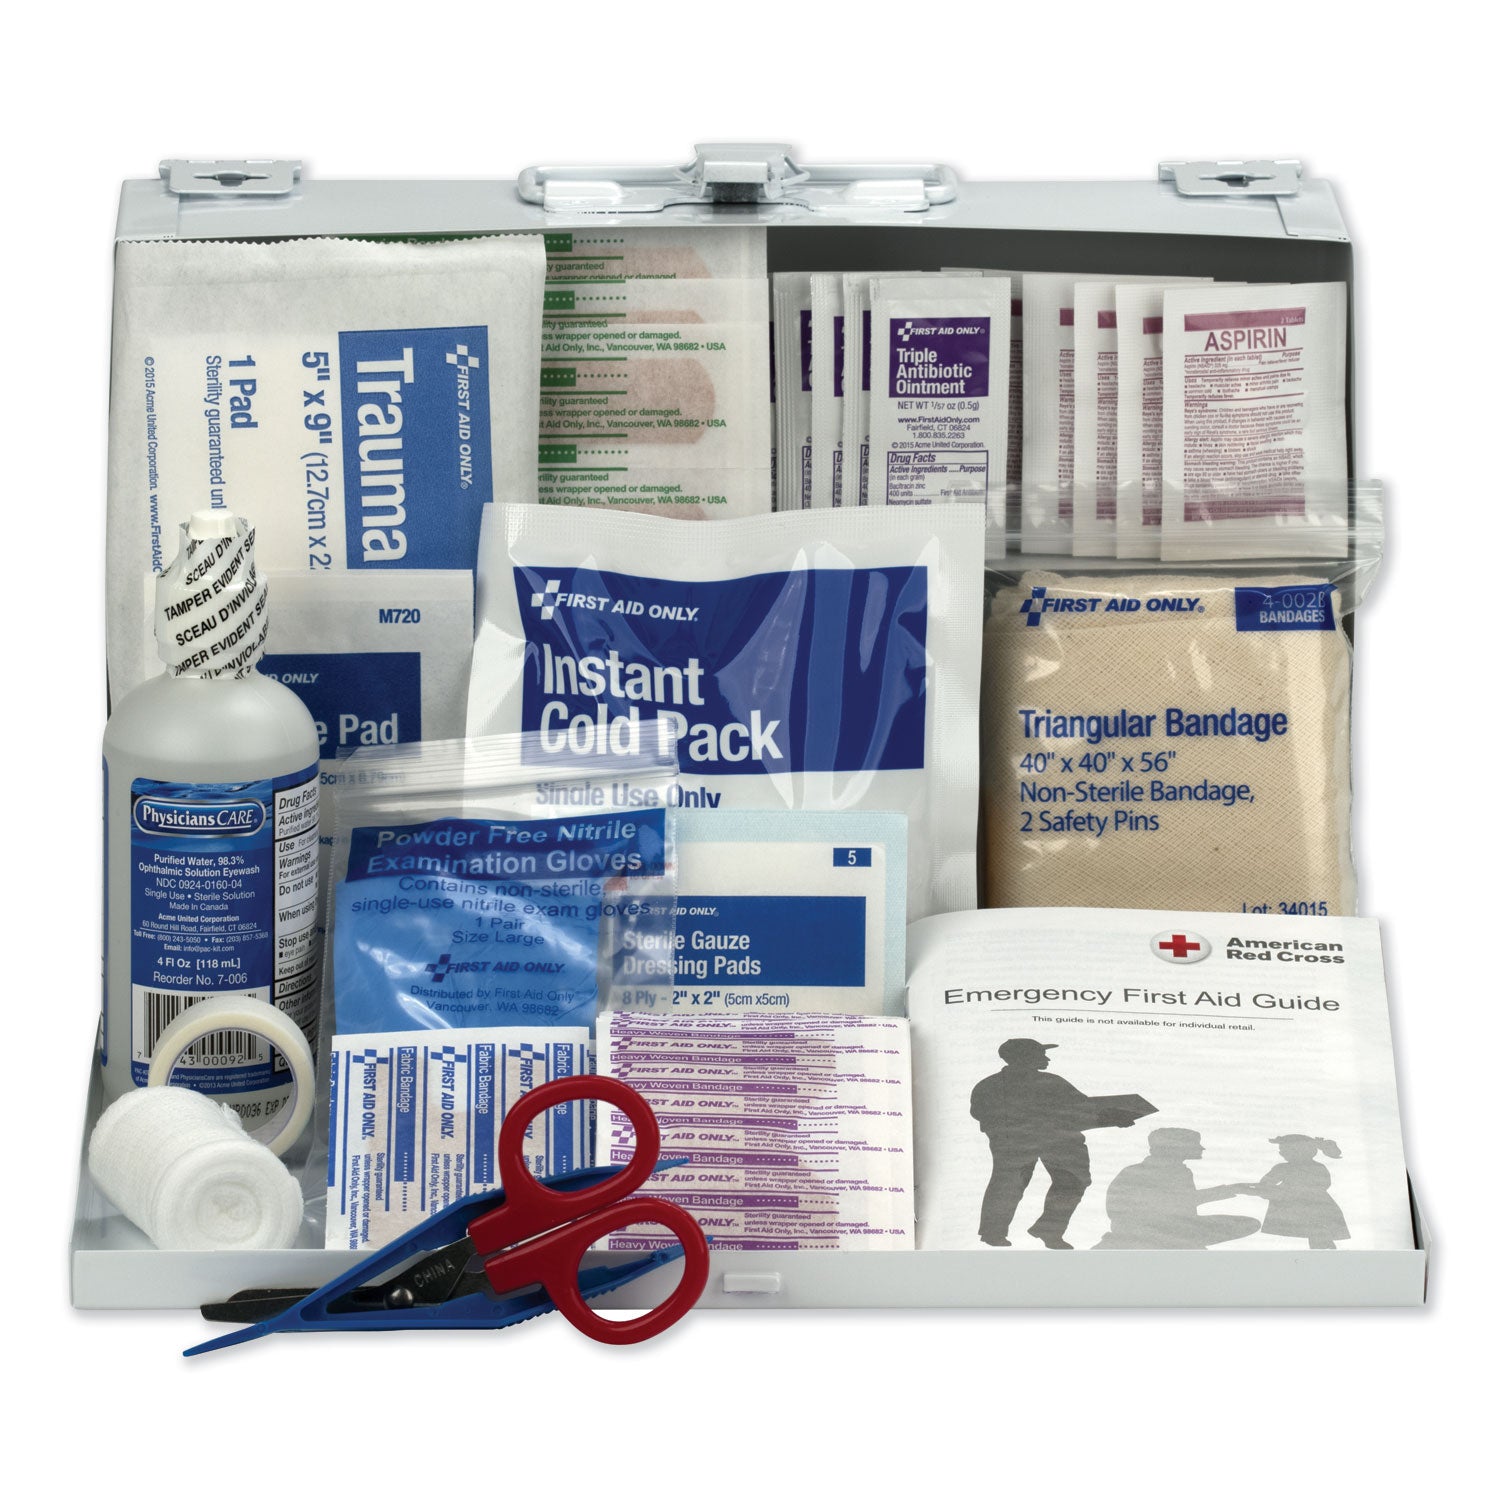 First Aid Kit for 25 People, 104 Pieces, OSHA Compliant, Metal Case - 